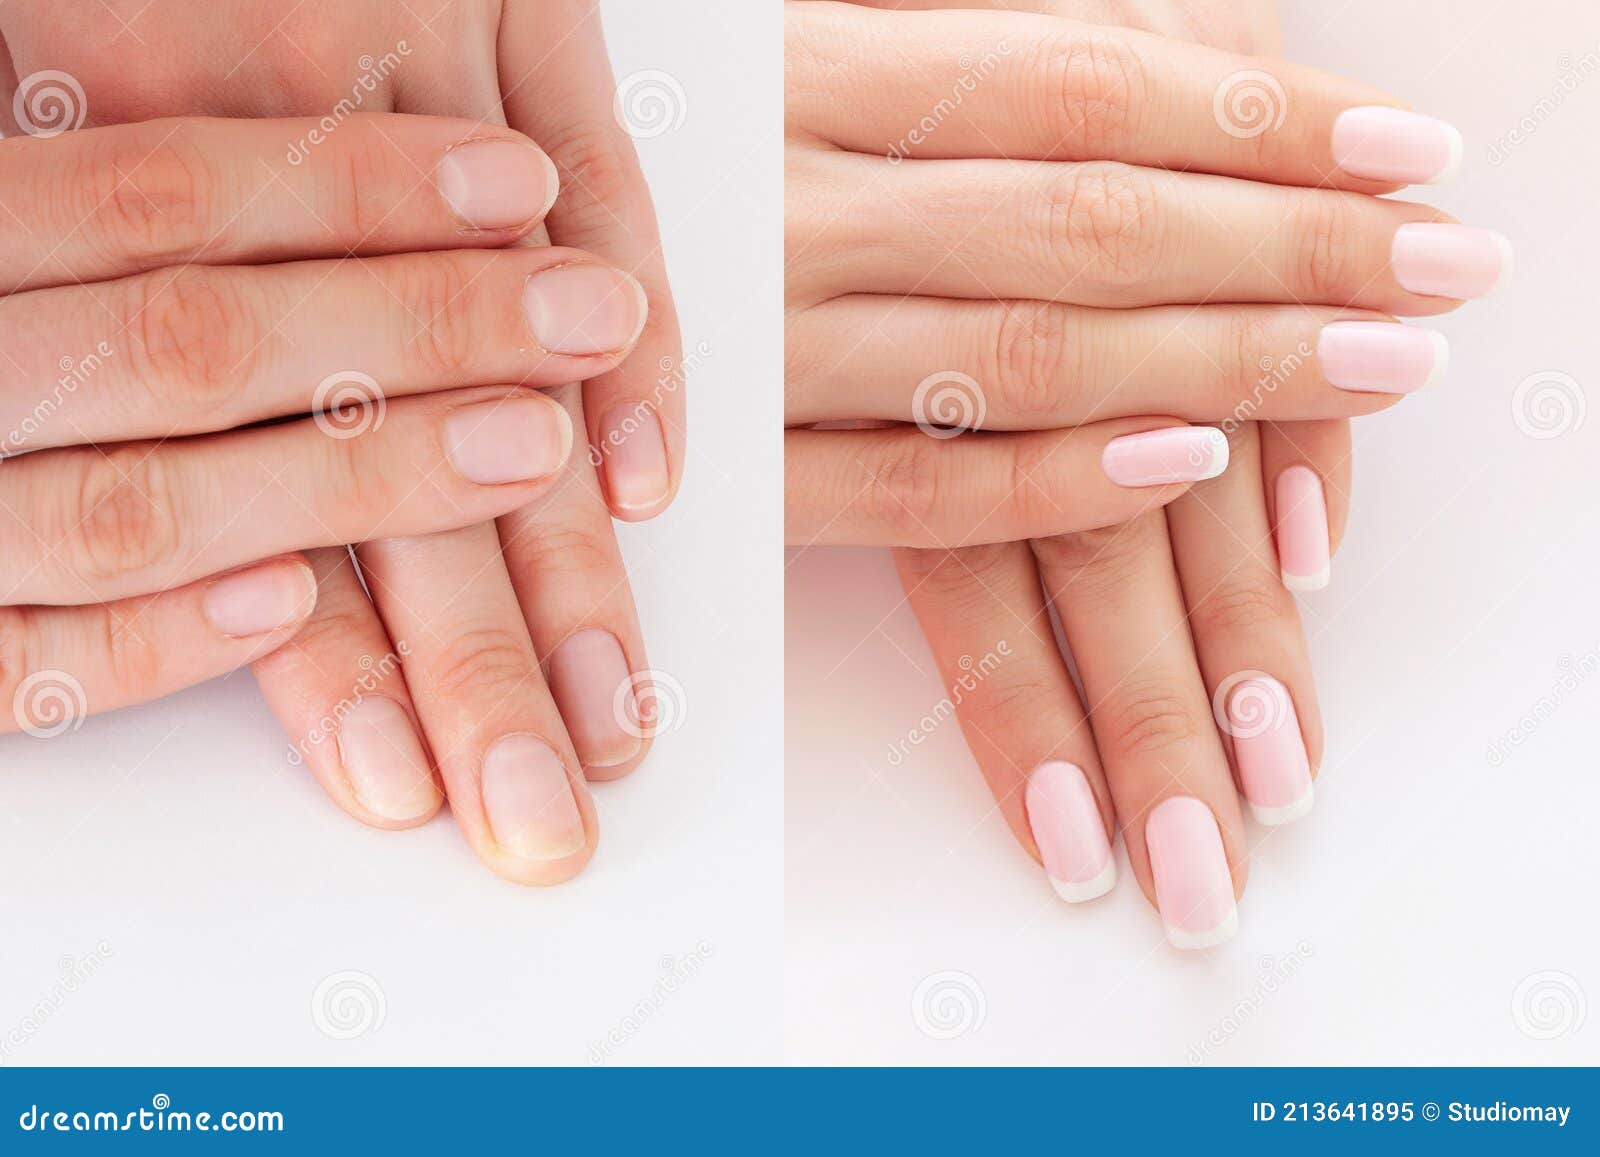 4. Natural Nail Coloration: The Benefits of Going Chemical-Free - wide 7